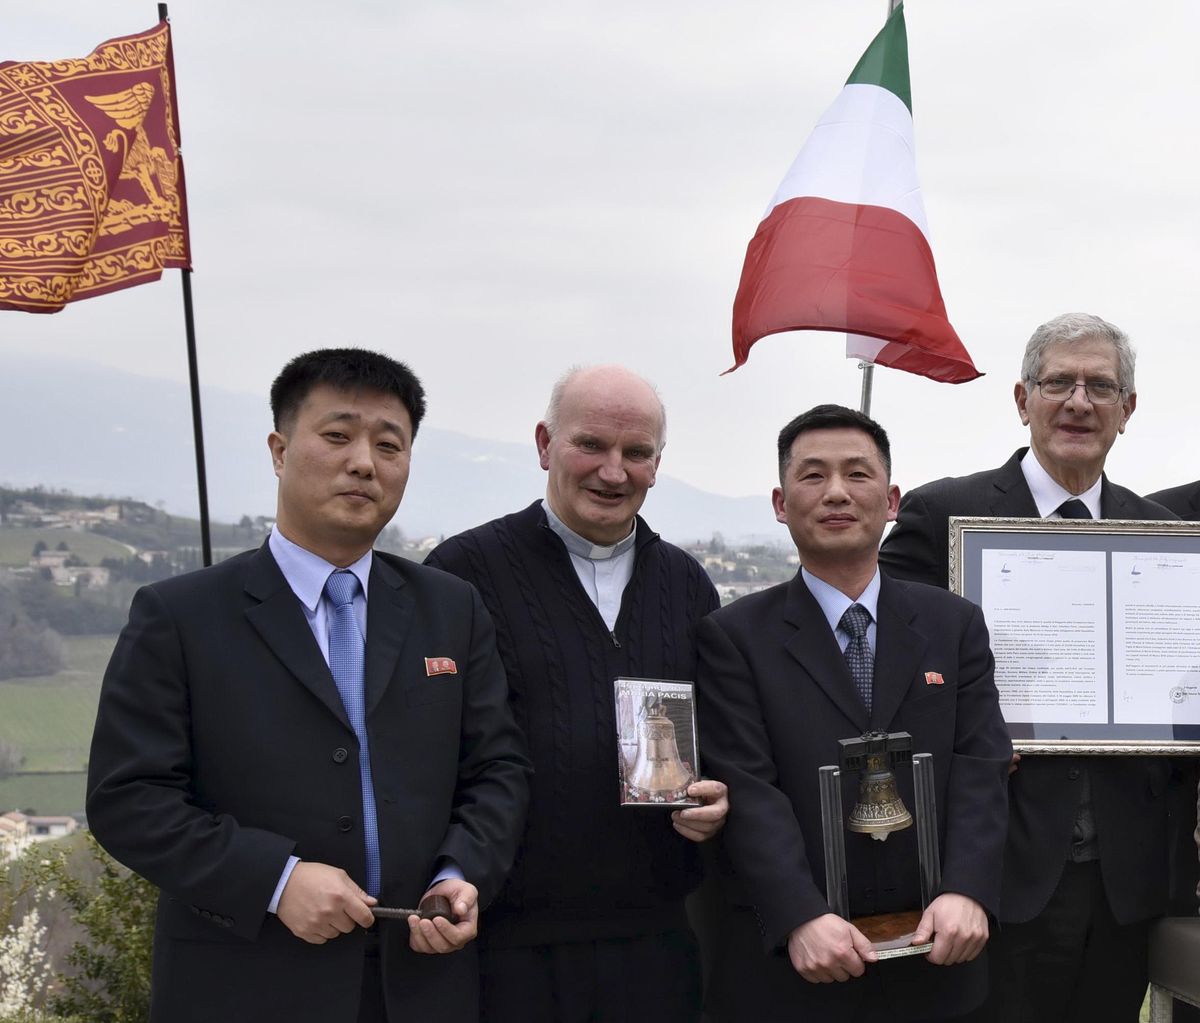 This March 20, 2018 photo made available Thursday, Jan. 3, 2019, by the Parish of Farra di Soligo, shows North Korea’s acting ambassador to Italy Jo Song Gil, second from right, holding a model of “Bell of Peace of Rovereto” during a cultural event on the occasion of a visit of the North Korean delegation to the Veneto region, in San Pietro di Feletto, near Treviso, northern Italy. Jo  went into hiding with his wife in November, South Korea’s spy agency told lawmakers in Seoul on Thursday, Jan. 3, 2019. Jo is flanked by don Brunone De Toffol, parish priest of Farra di Soligo, second from left, and Senator Valentino Perin, right. The North Korean diplomat at left is unidentified. (Aldo-Cietto / Associated Press)